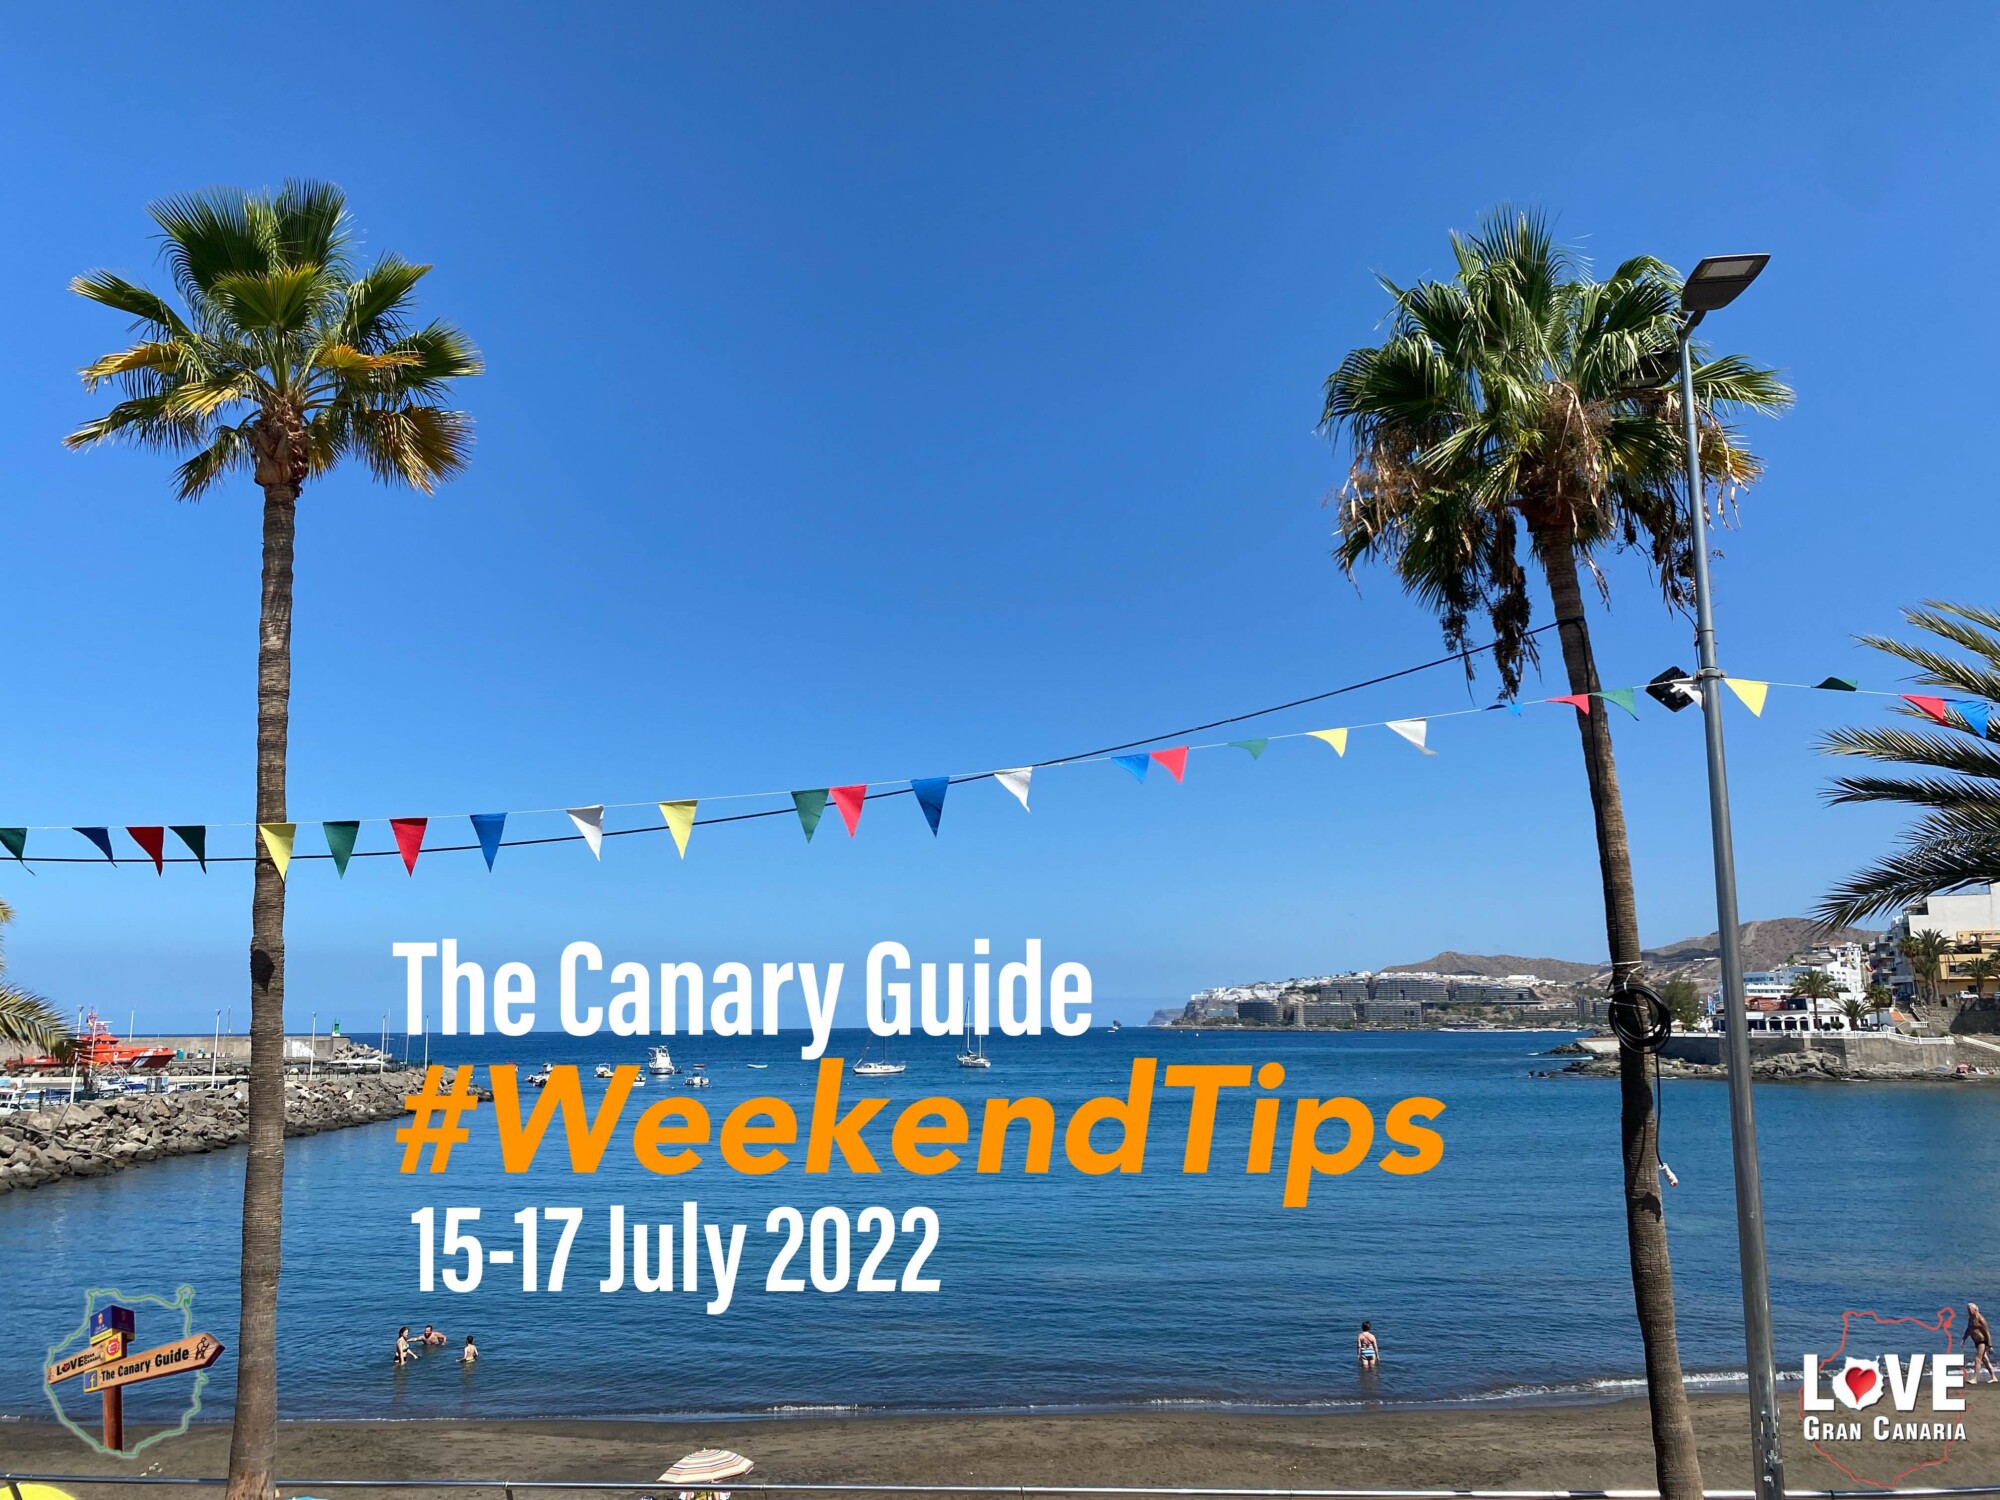 The Canary Guide #WeekendTips 15-17 July 2022